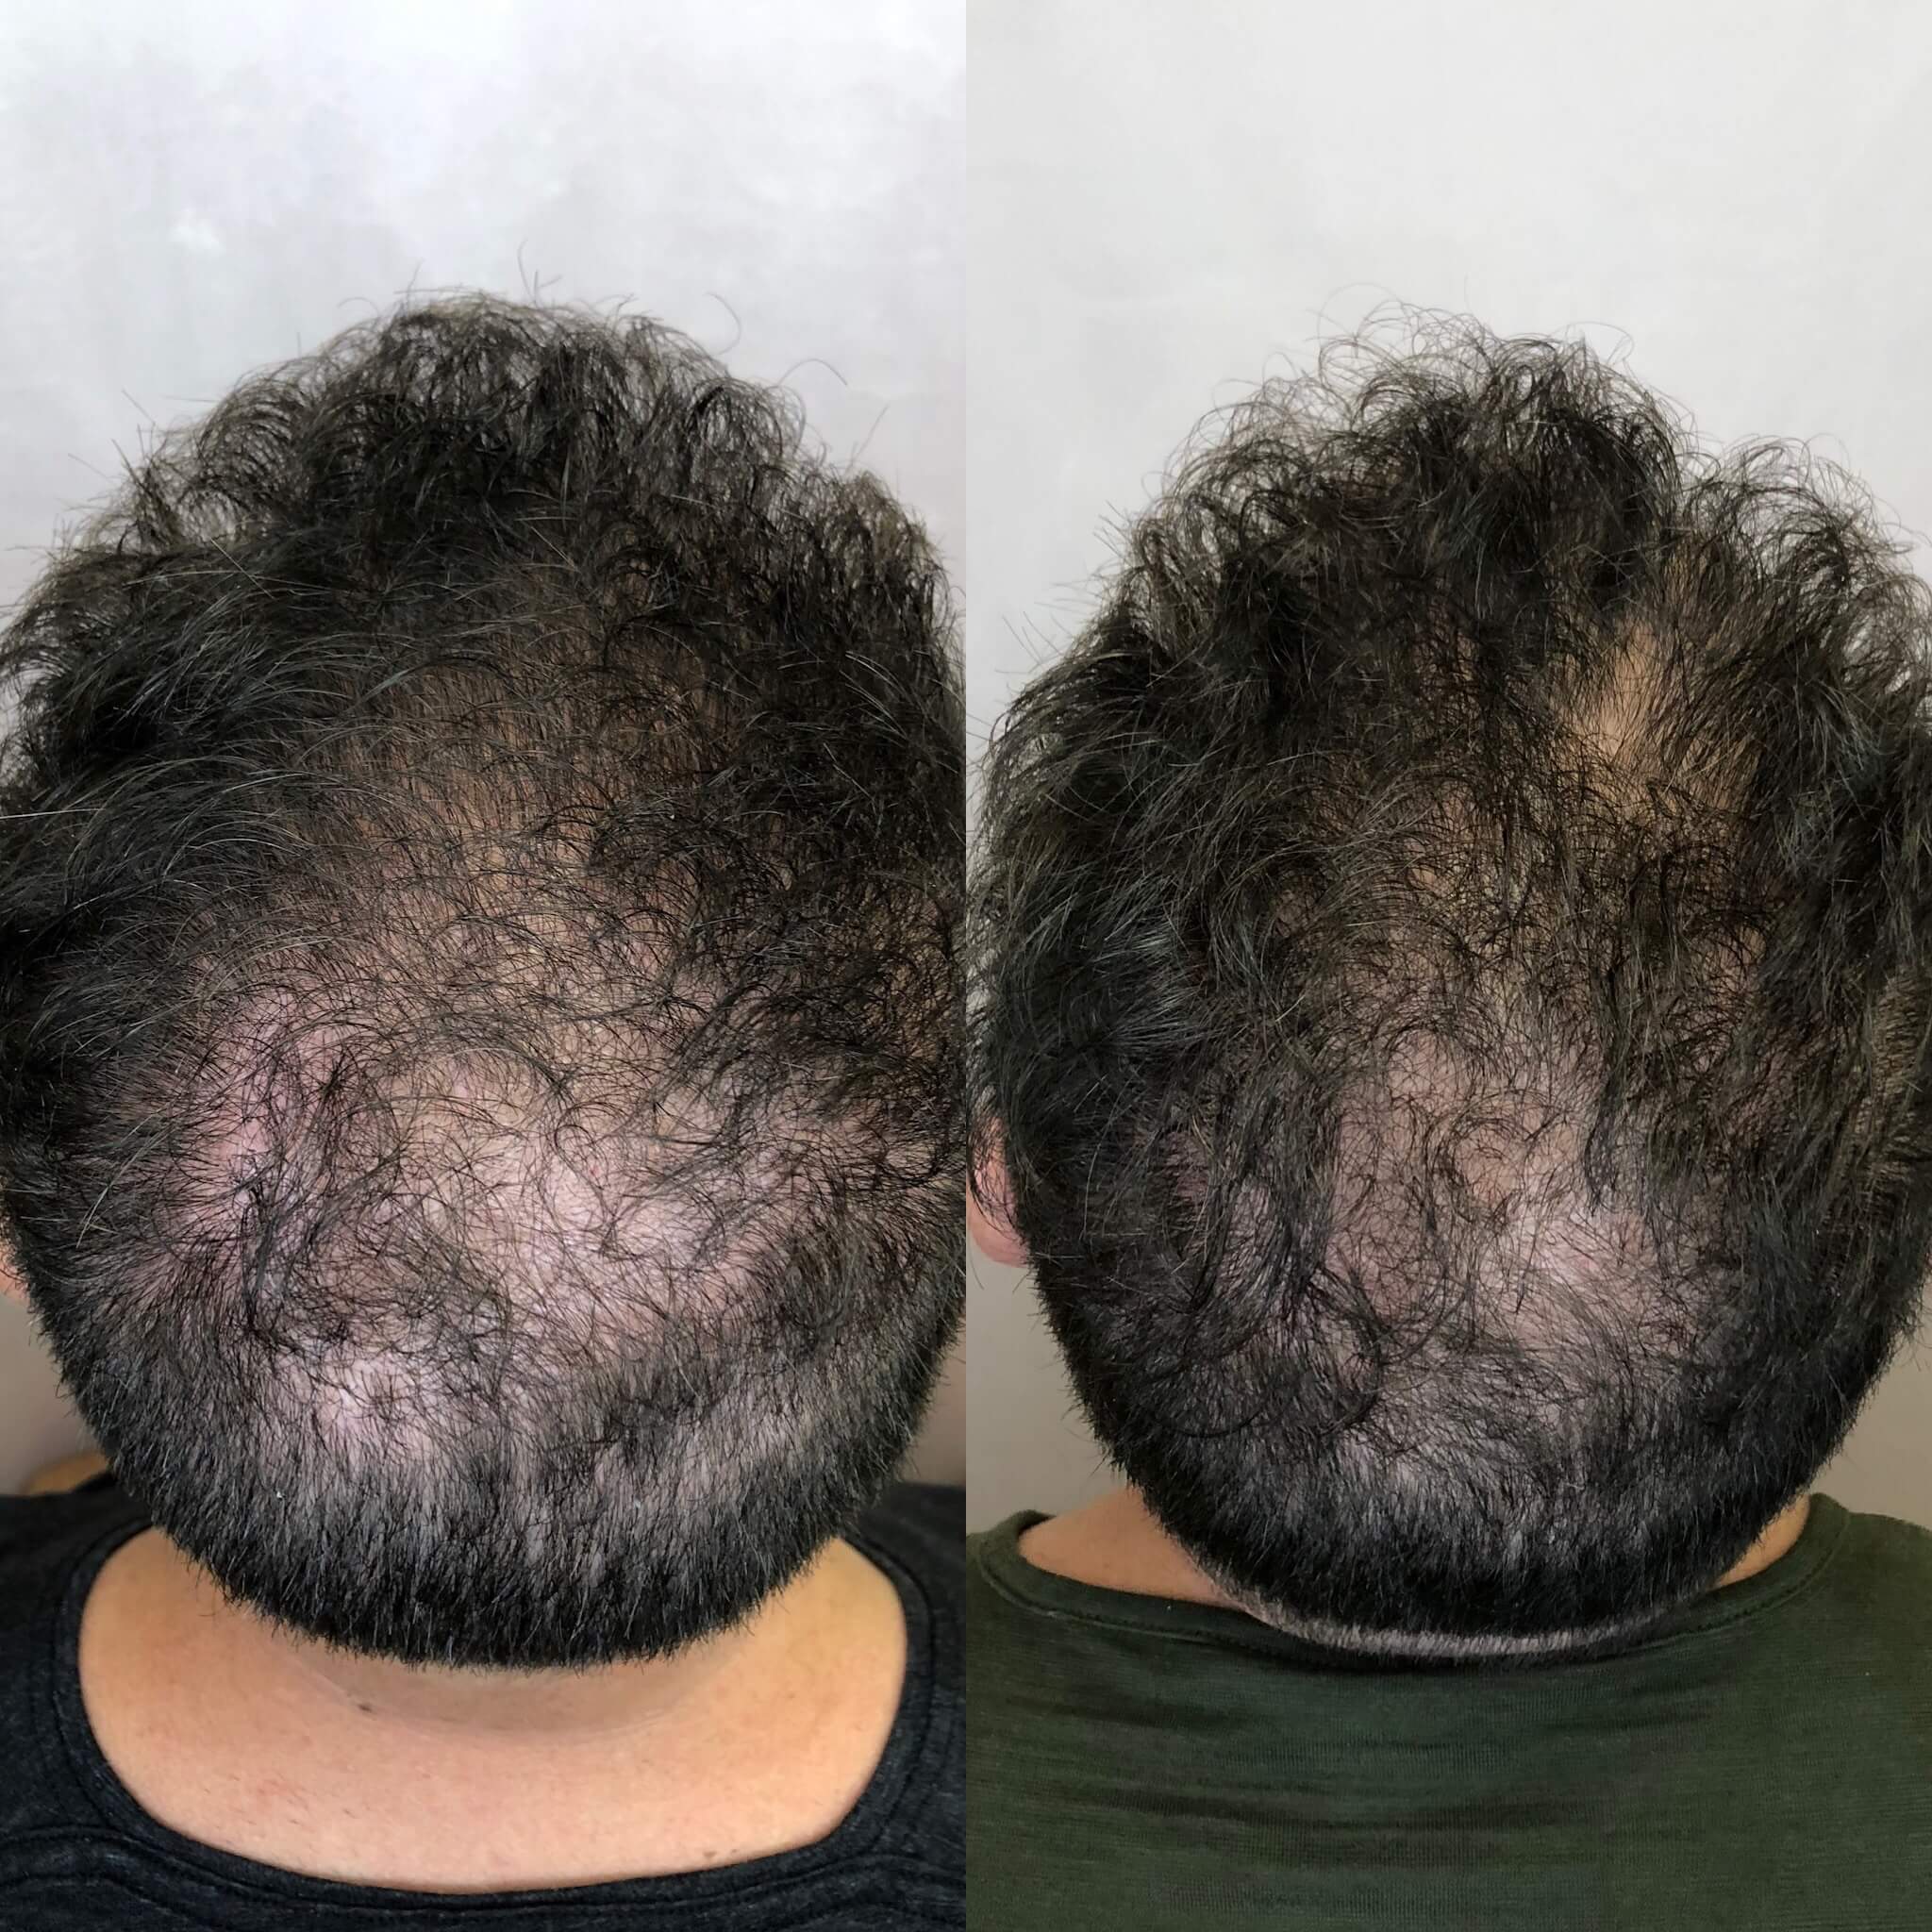 Before and After PRP Hair Restoration Treatment | Beauty Boost Med Spa in Newport Beach, CA